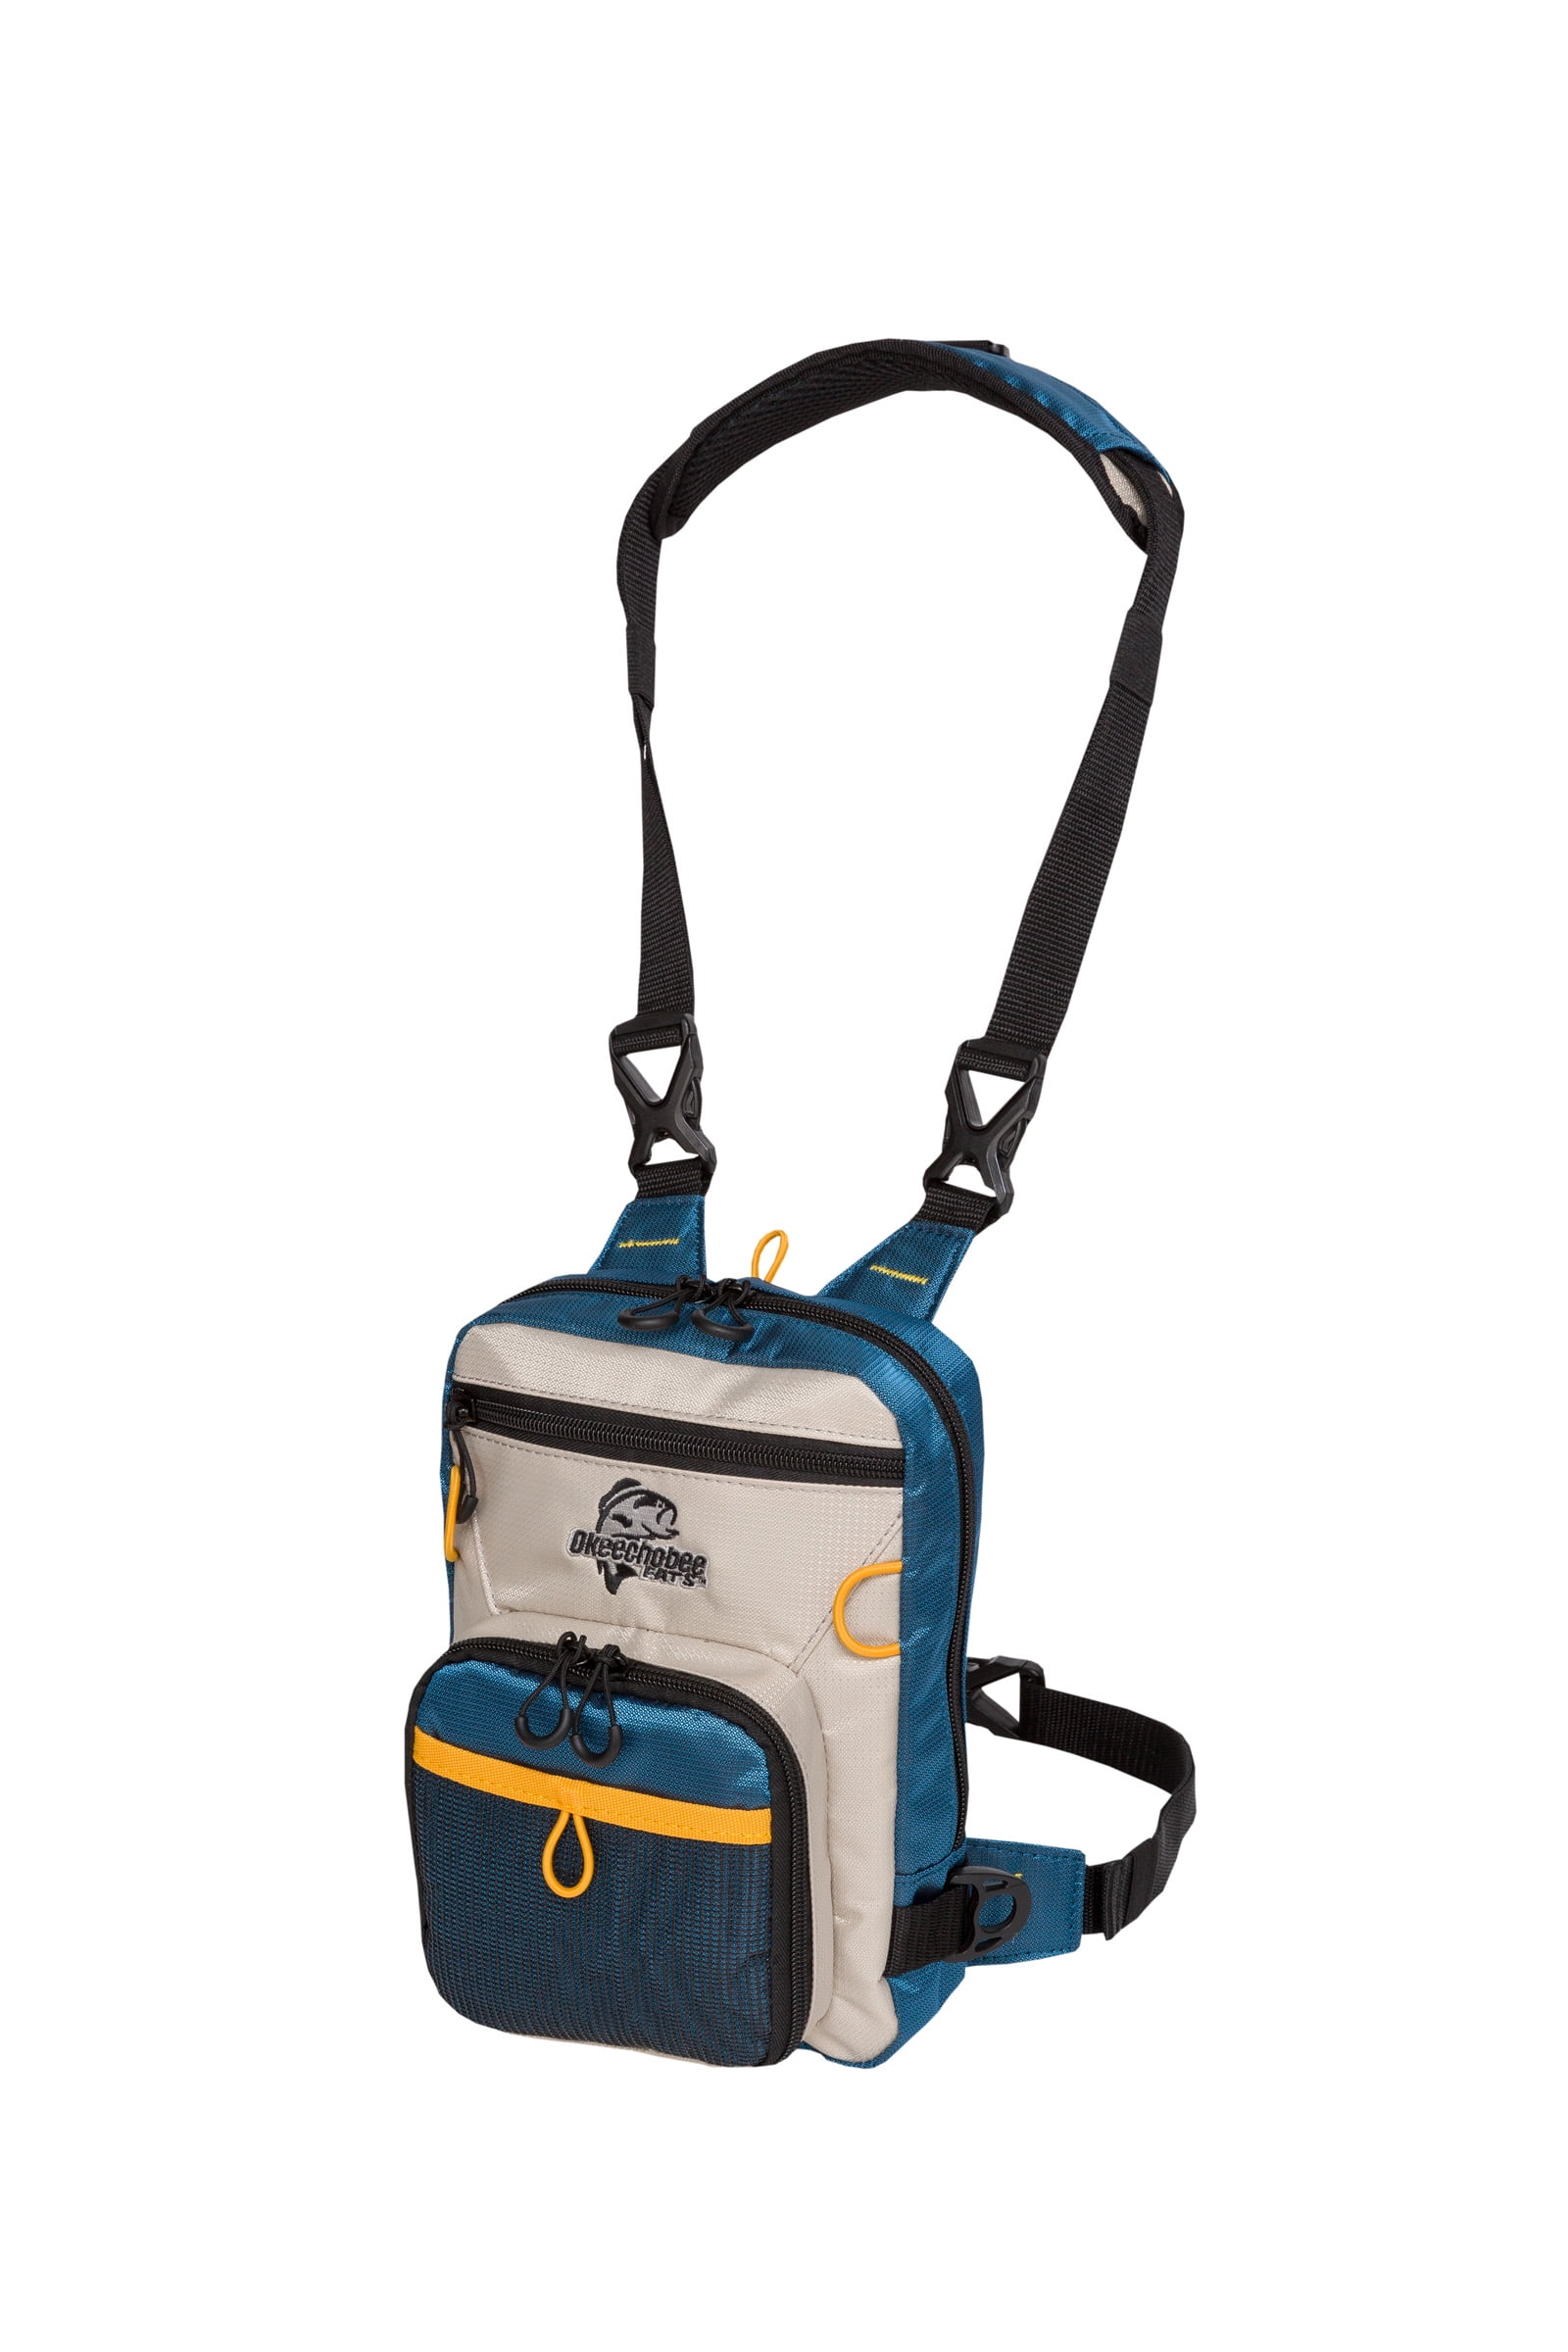 Small Soft-Sided Fly Fishing Tackle Bag Chest Pack - UK